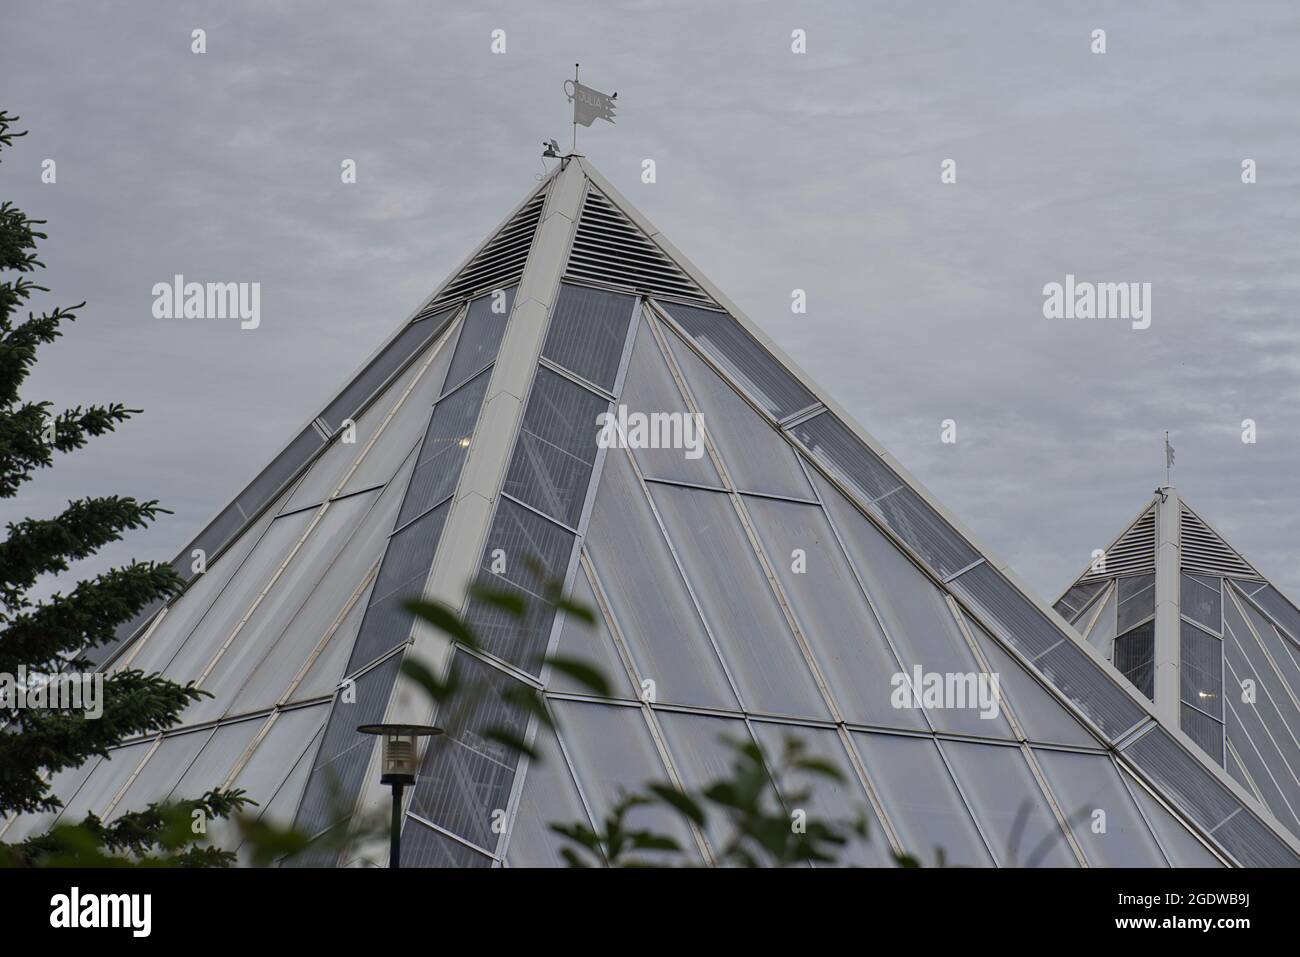 Pyramid shaped greenhouse in Oulu Botanical Garden, Finland Stock Photo